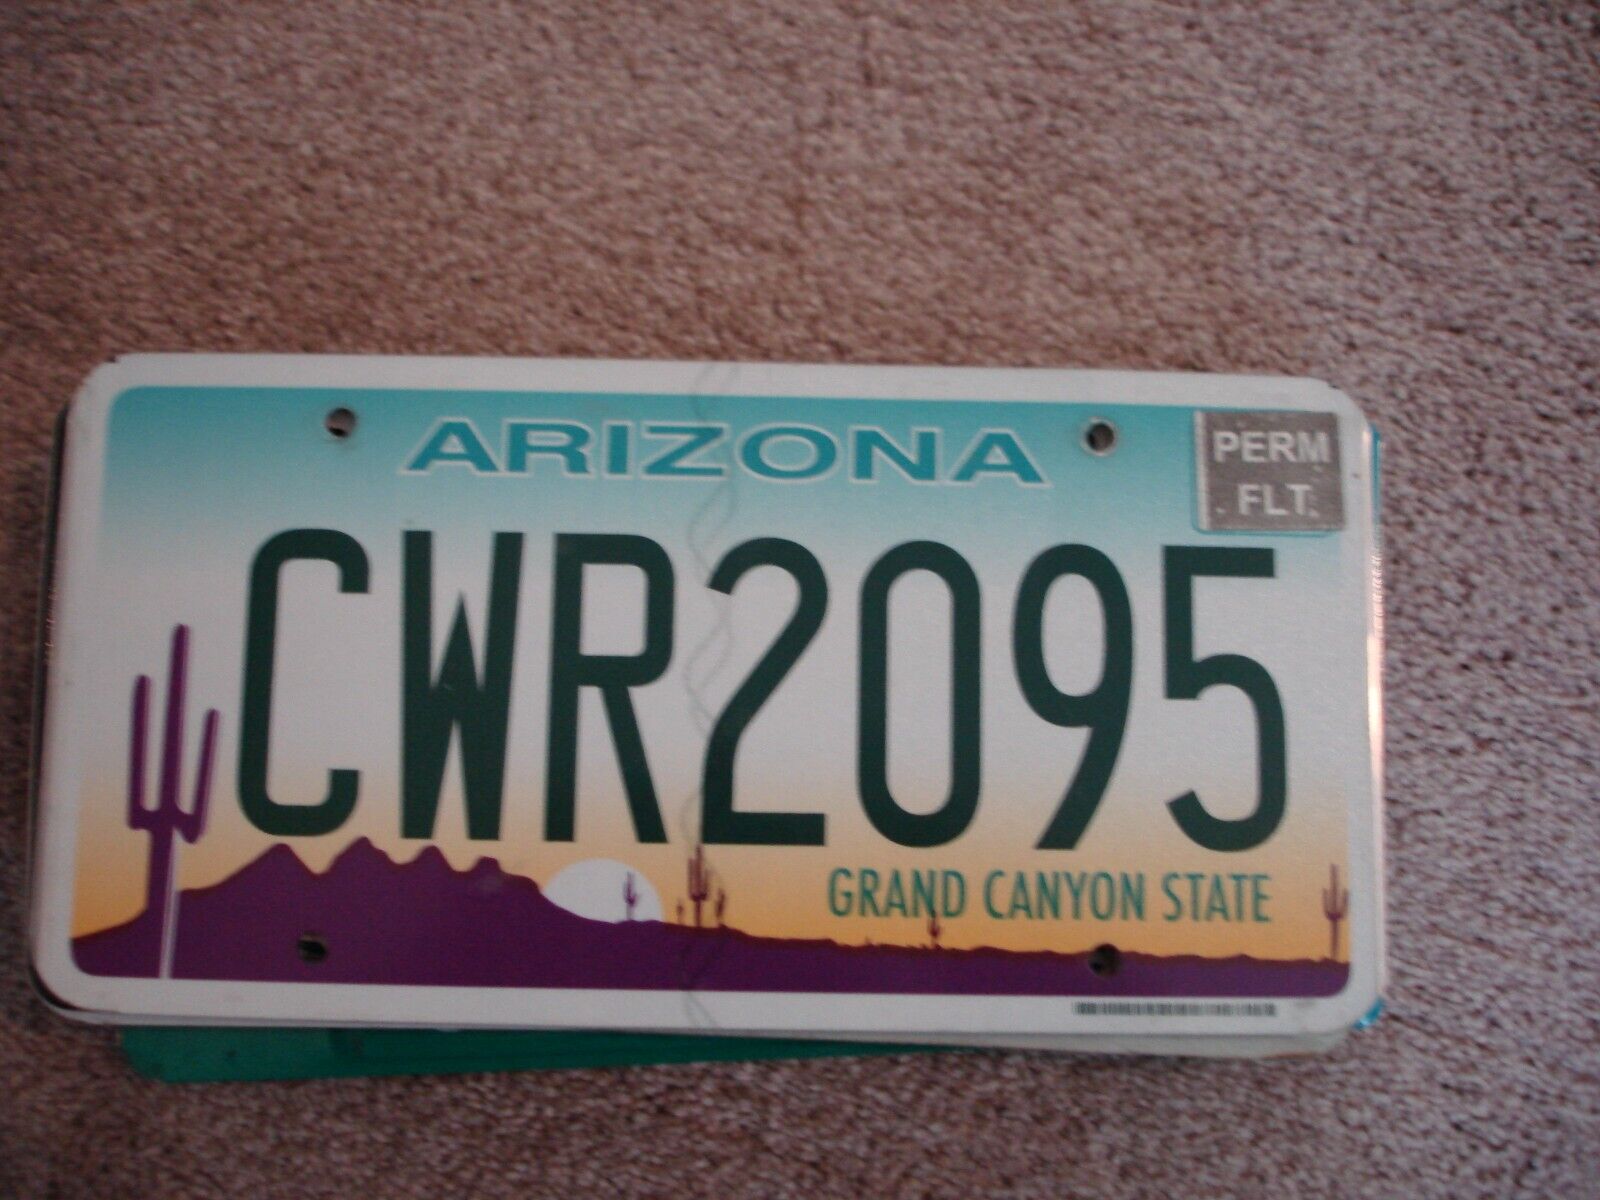 ARIZONA GRAND CANYON       LICENSE PLATE BUY ALL STATES HERE 